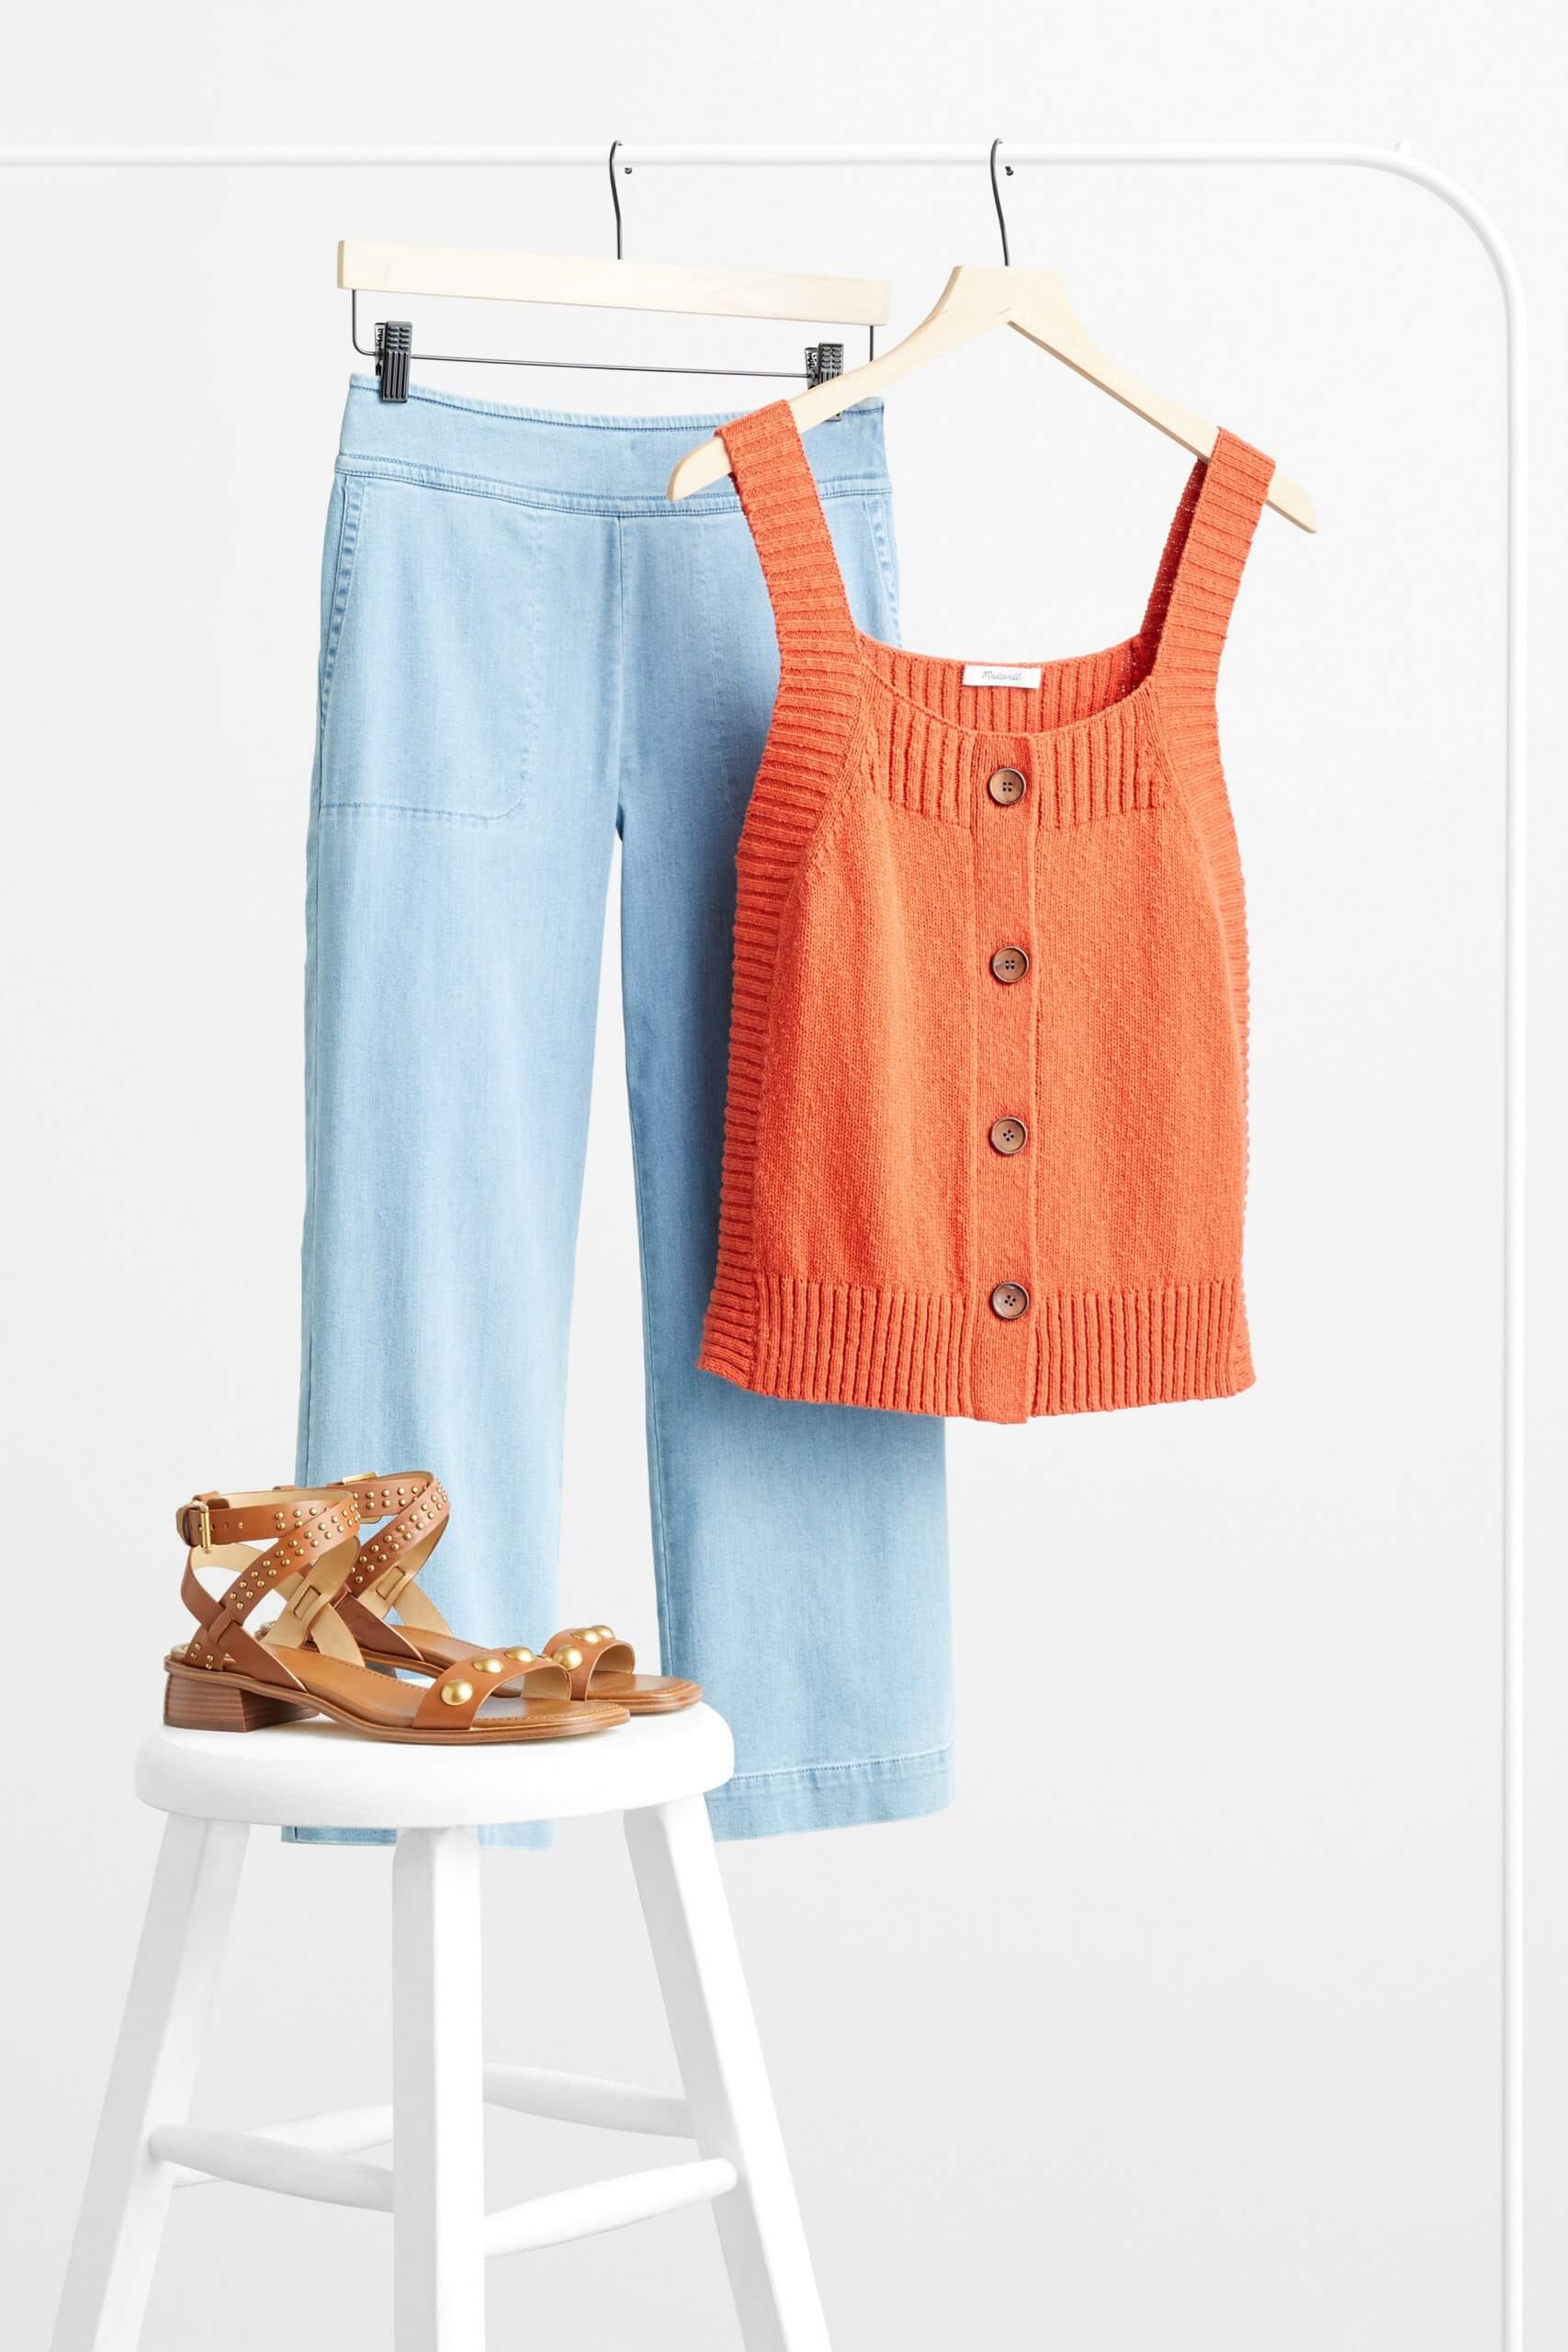 Stitch Fix women’s cropped wide-leg jeans with orange button front tank top and brown sandals.